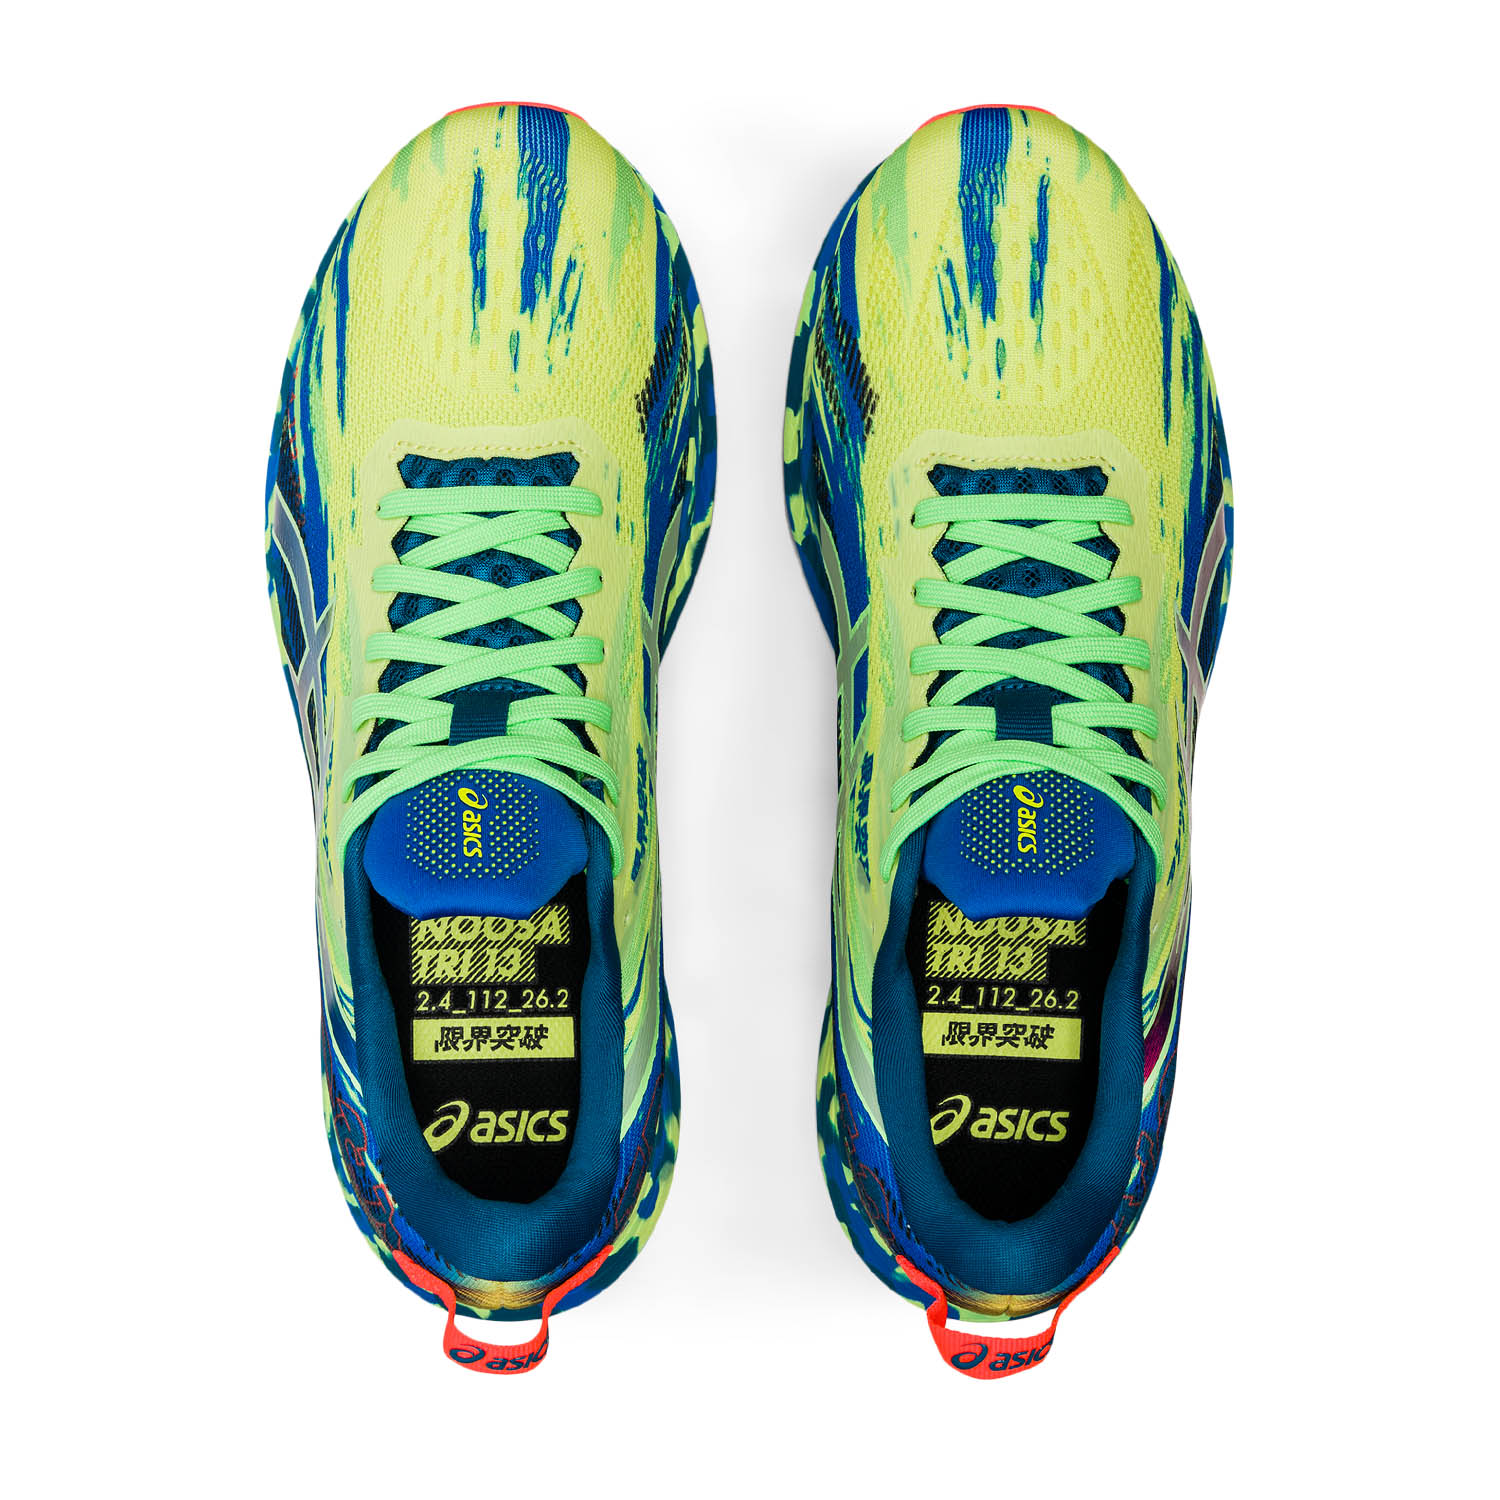 Asics Noosa Tri 13 Men's Running Shoes Glow Yellow/Bright Lime